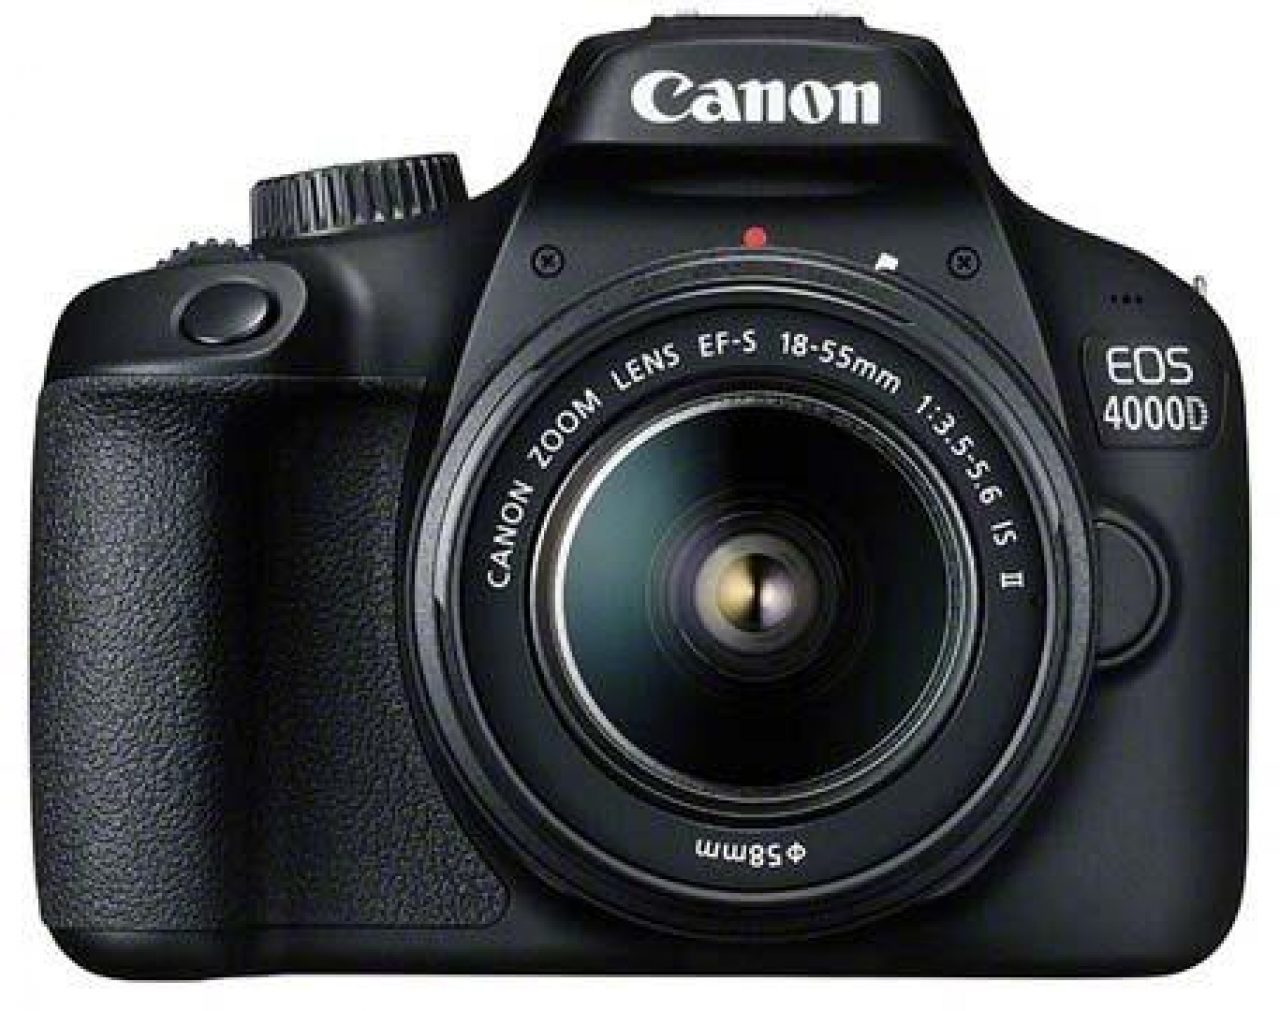 Canon EOS 4000D Review Photography